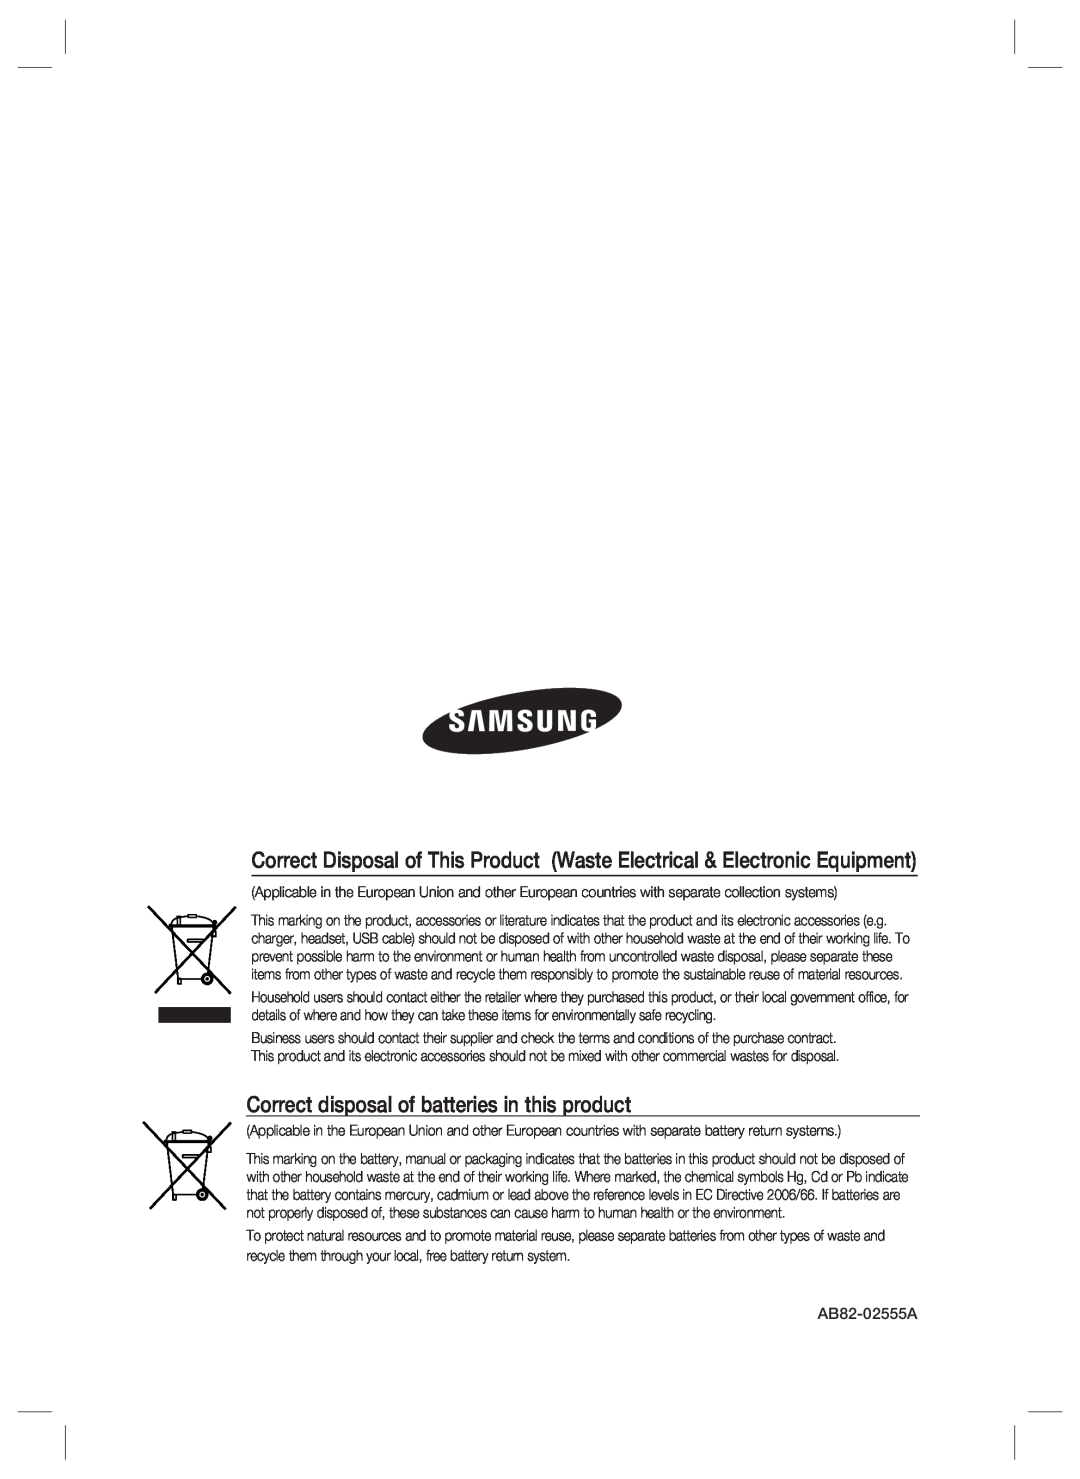 Samsung SSA-R2001 user manual Correct disposal of batteries in this product 